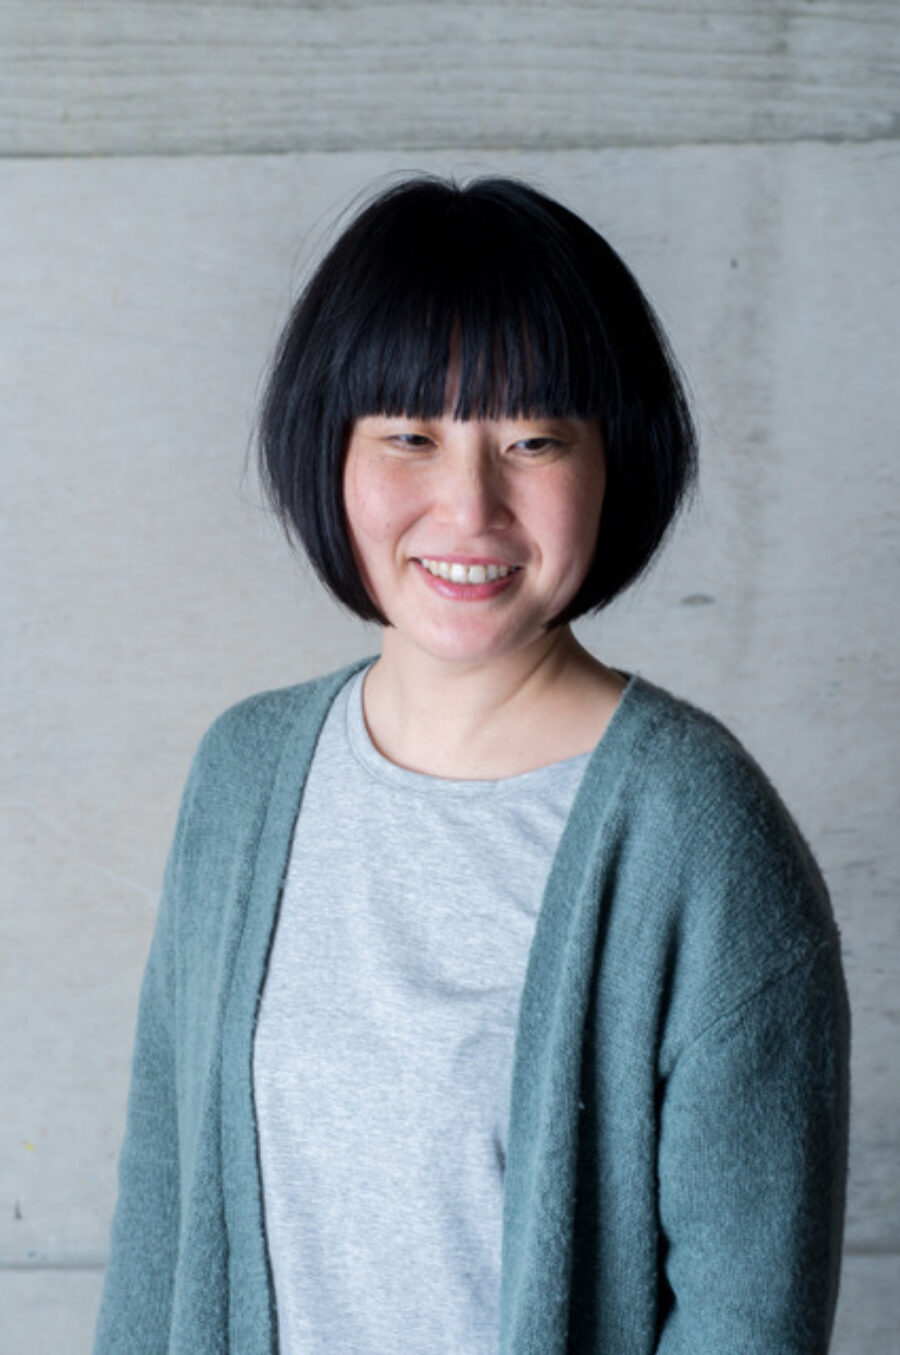 Photo of Tomoko Inagaki standing in front of a white wall. Inagaki has chin length black hair and bangs. She is wearing a bluish cardigan and a grey shirt.